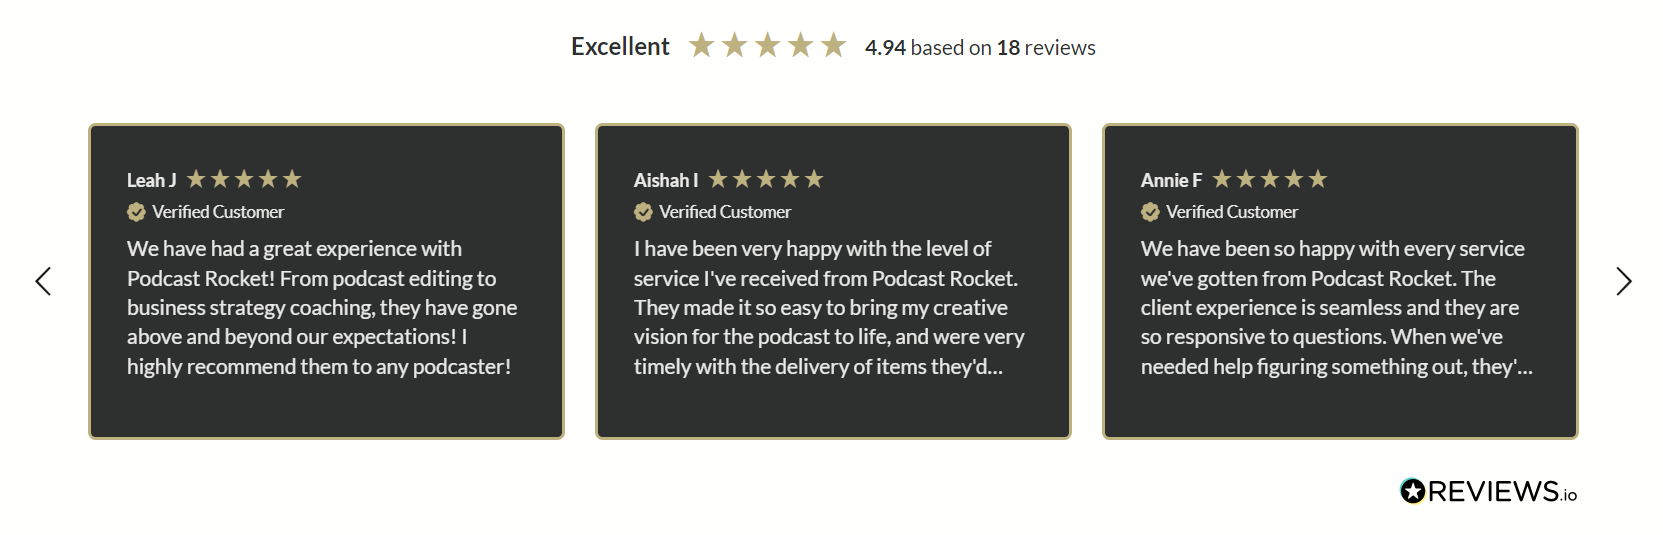 Podcast Rocket is rated 4.94/5 stars based on 18 reviews.